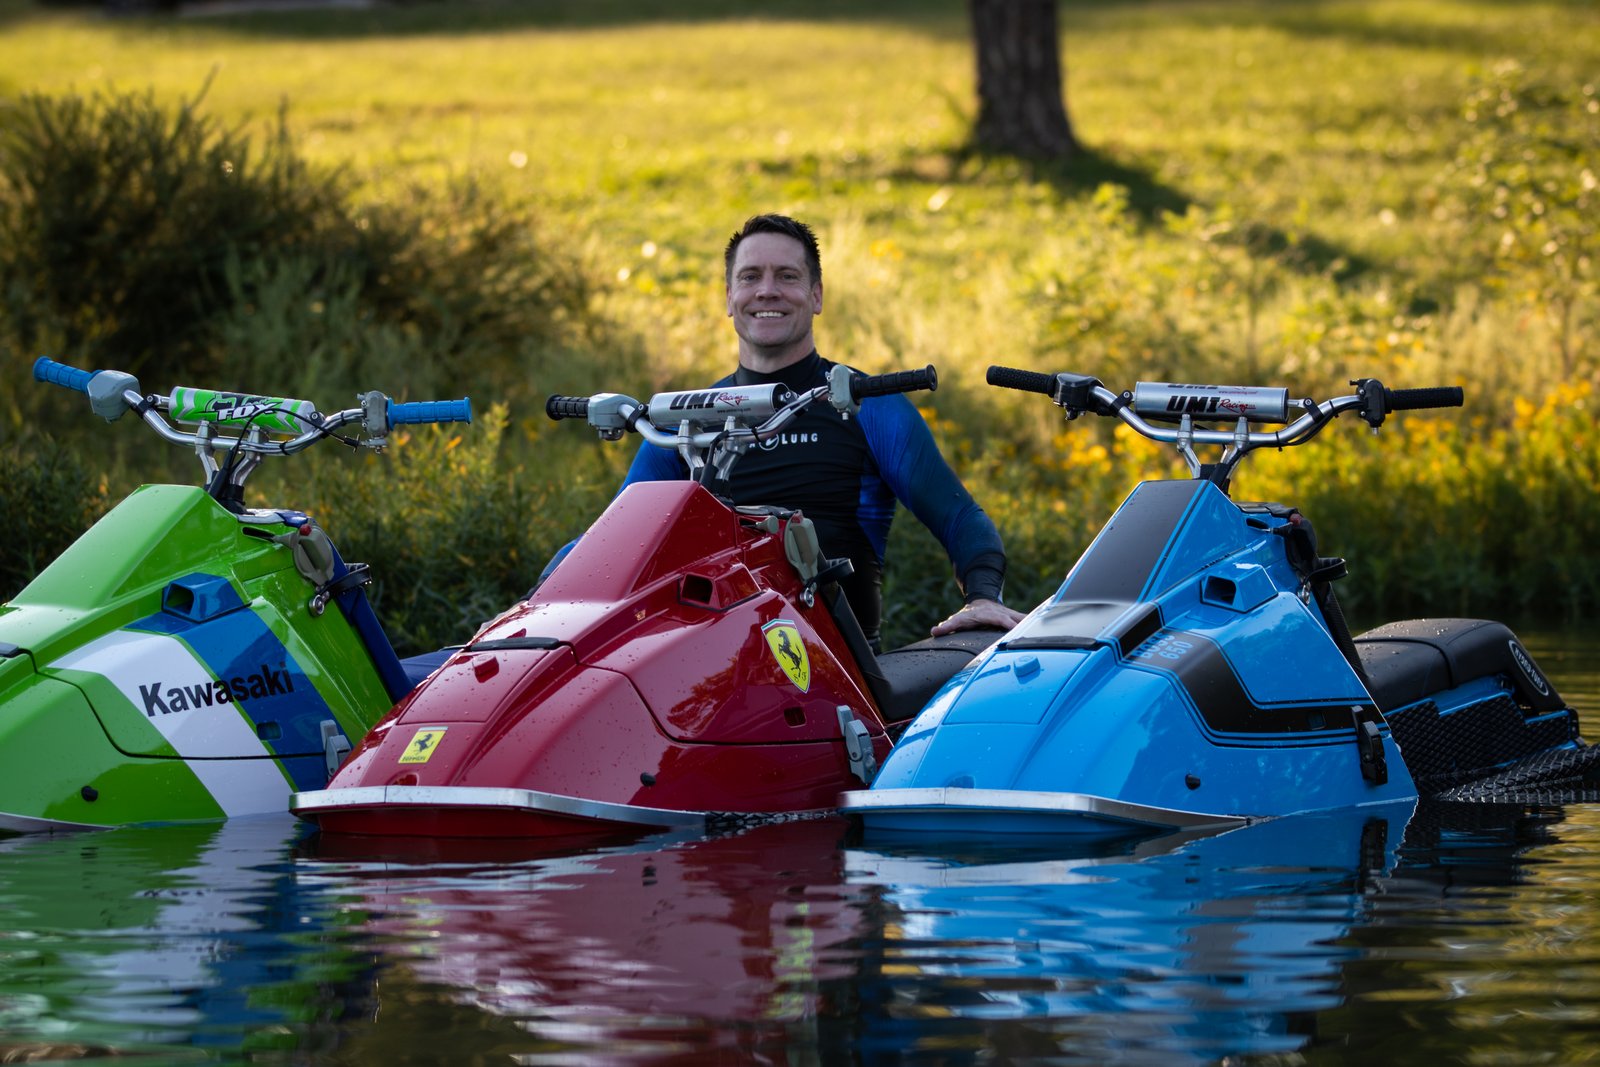 Builder Jay Bramble Uses Cars, Sportbikes as Template for JetSkis